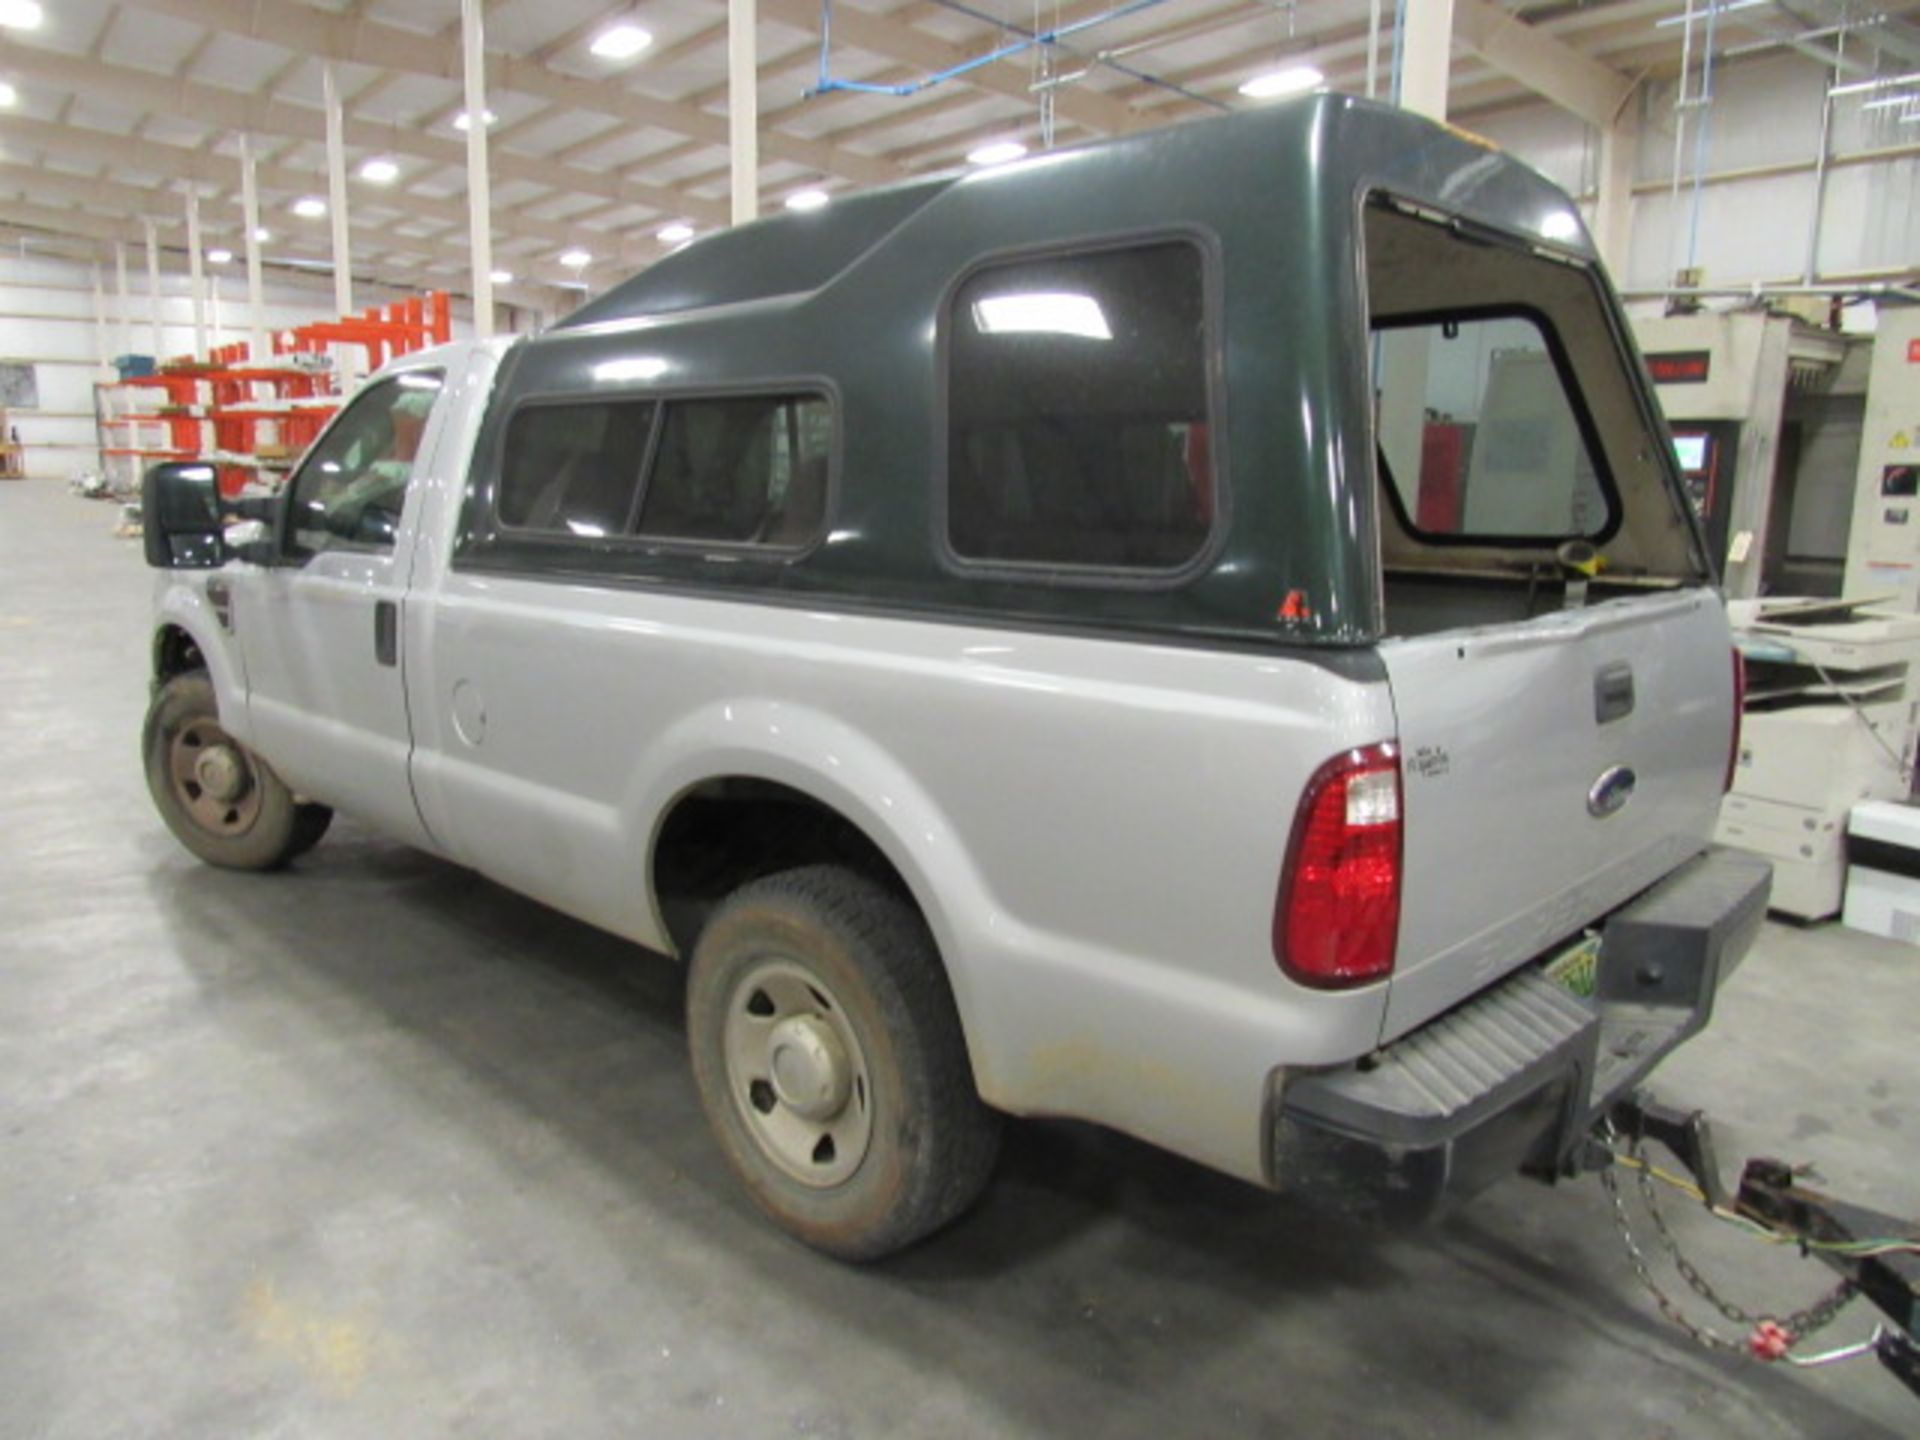 Ford F-250 Automatic Pick-Up Truck with 8' Bed, Air, Bed Shell, Approx 228,000 Miles, mfg.2008 - Image 3 of 8